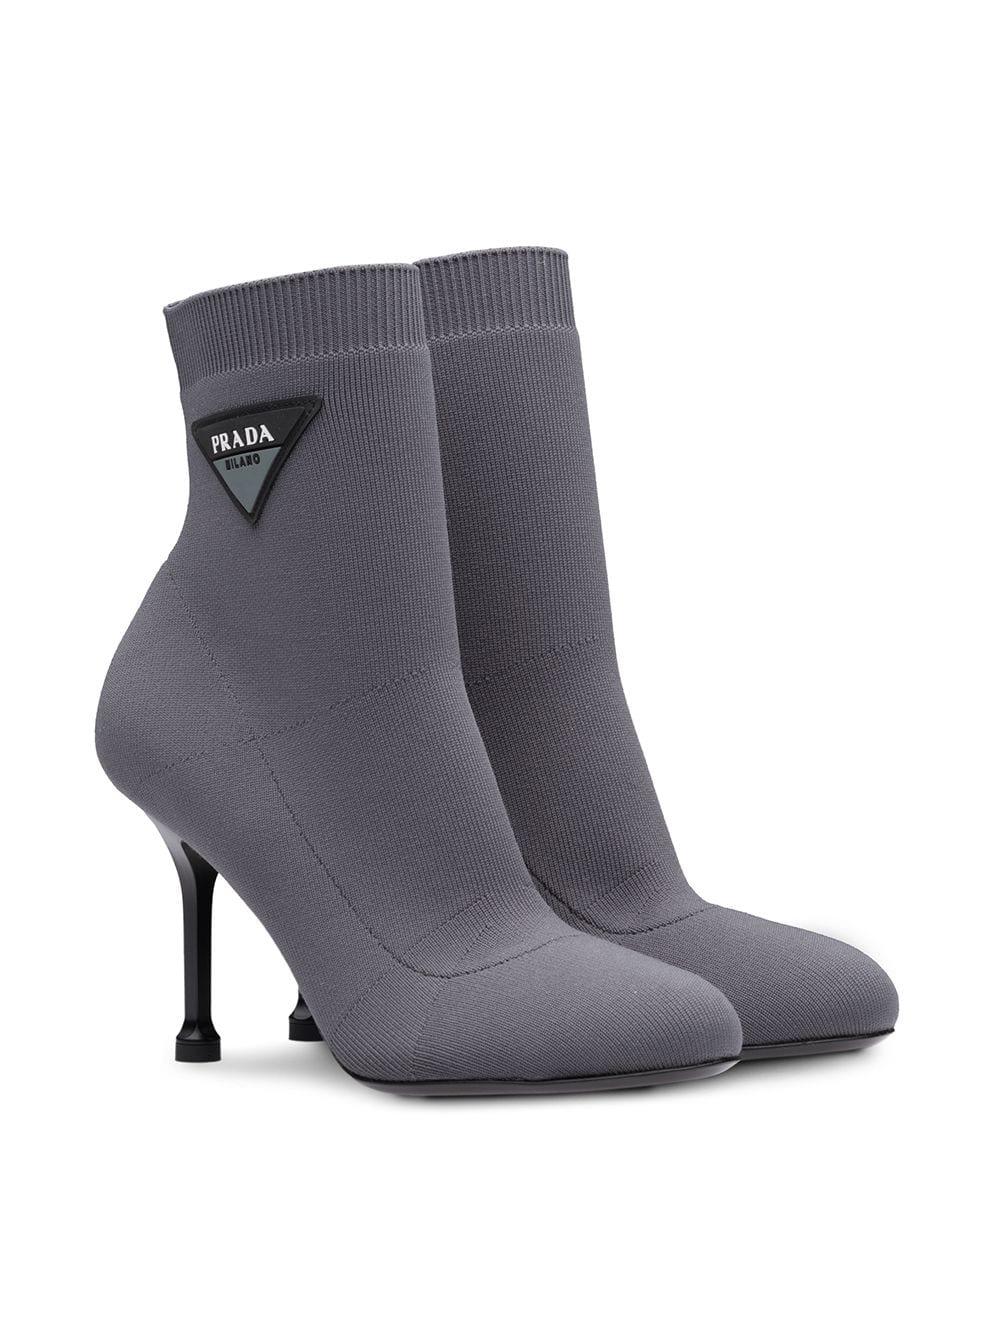 Prada Synthetic Knit Sock Heeled Boots in Grey (Gray) - Lyst